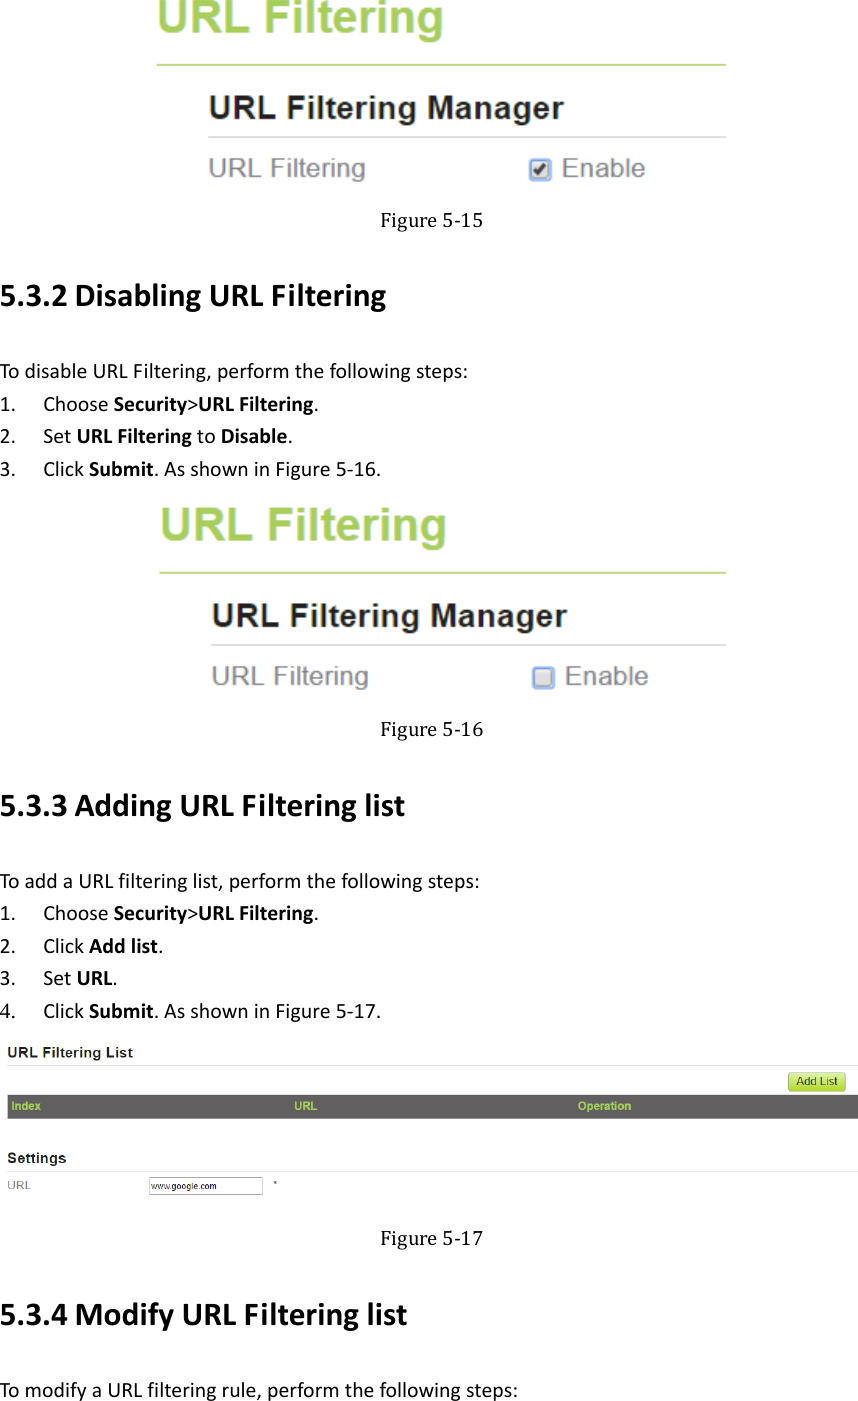    Figure5‐155.3.2 DisablingURLFilteringTodisableURLFiltering,performthefollowingsteps:1. ChooseSecurity&gt;URLFiltering.2. SetURLFilteringtoDisable.3. ClickSubmit.AsshowninFigure5‐16. Figure5‐165.3.3 AddingURLFilteringlistToaddaURLfilteringlist,performthefollowingsteps:1. ChooseSecurity&gt;URLFiltering.2. ClickAddlist.3. SetURL.4. ClickSubmit.AsshowninFigure5‐17.  Figure5‐175.3.4 ModifyURLFilteringlistTomodifyaURLfilteringrule,performthefollowingsteps: